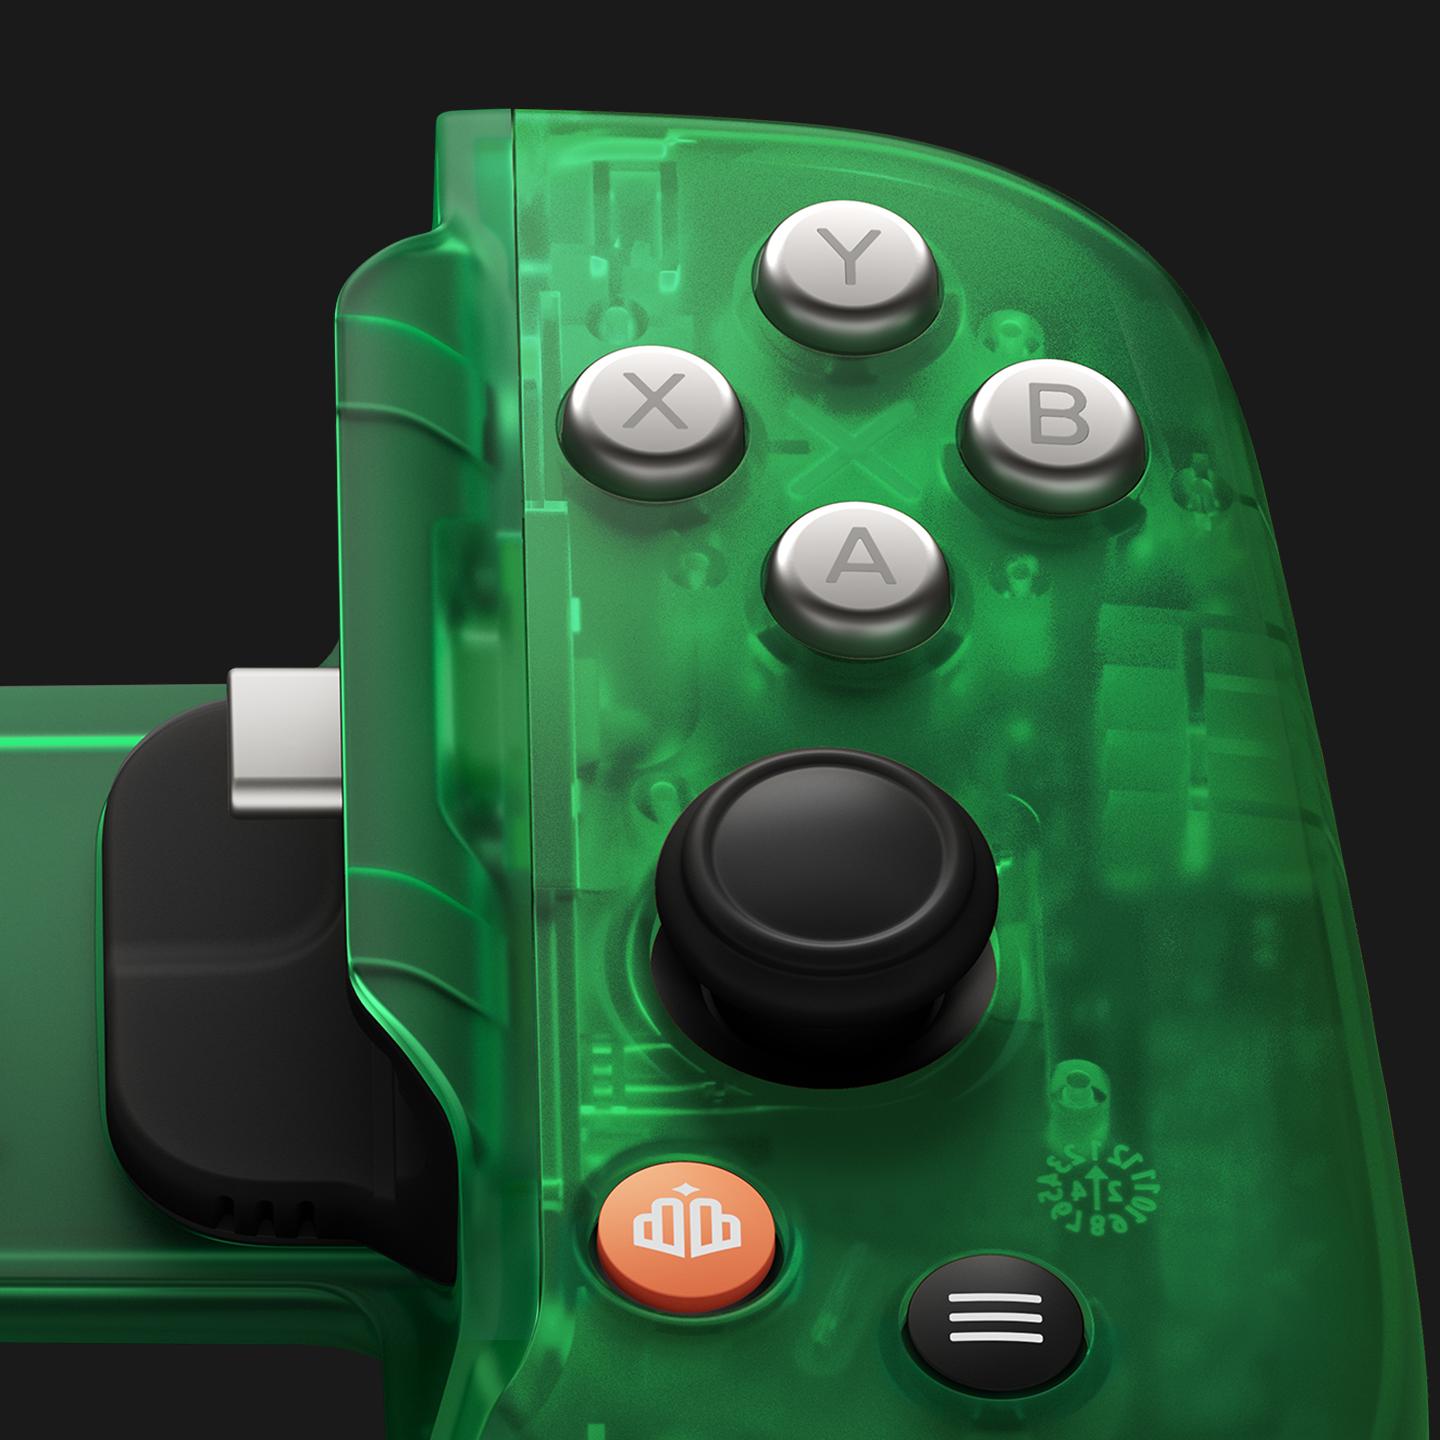 Featuring a reshaped aluminum D-pad and aluminum ABXY buttons - experience enhanced responsiveness, resulting in superior feel and control across all game play genres.